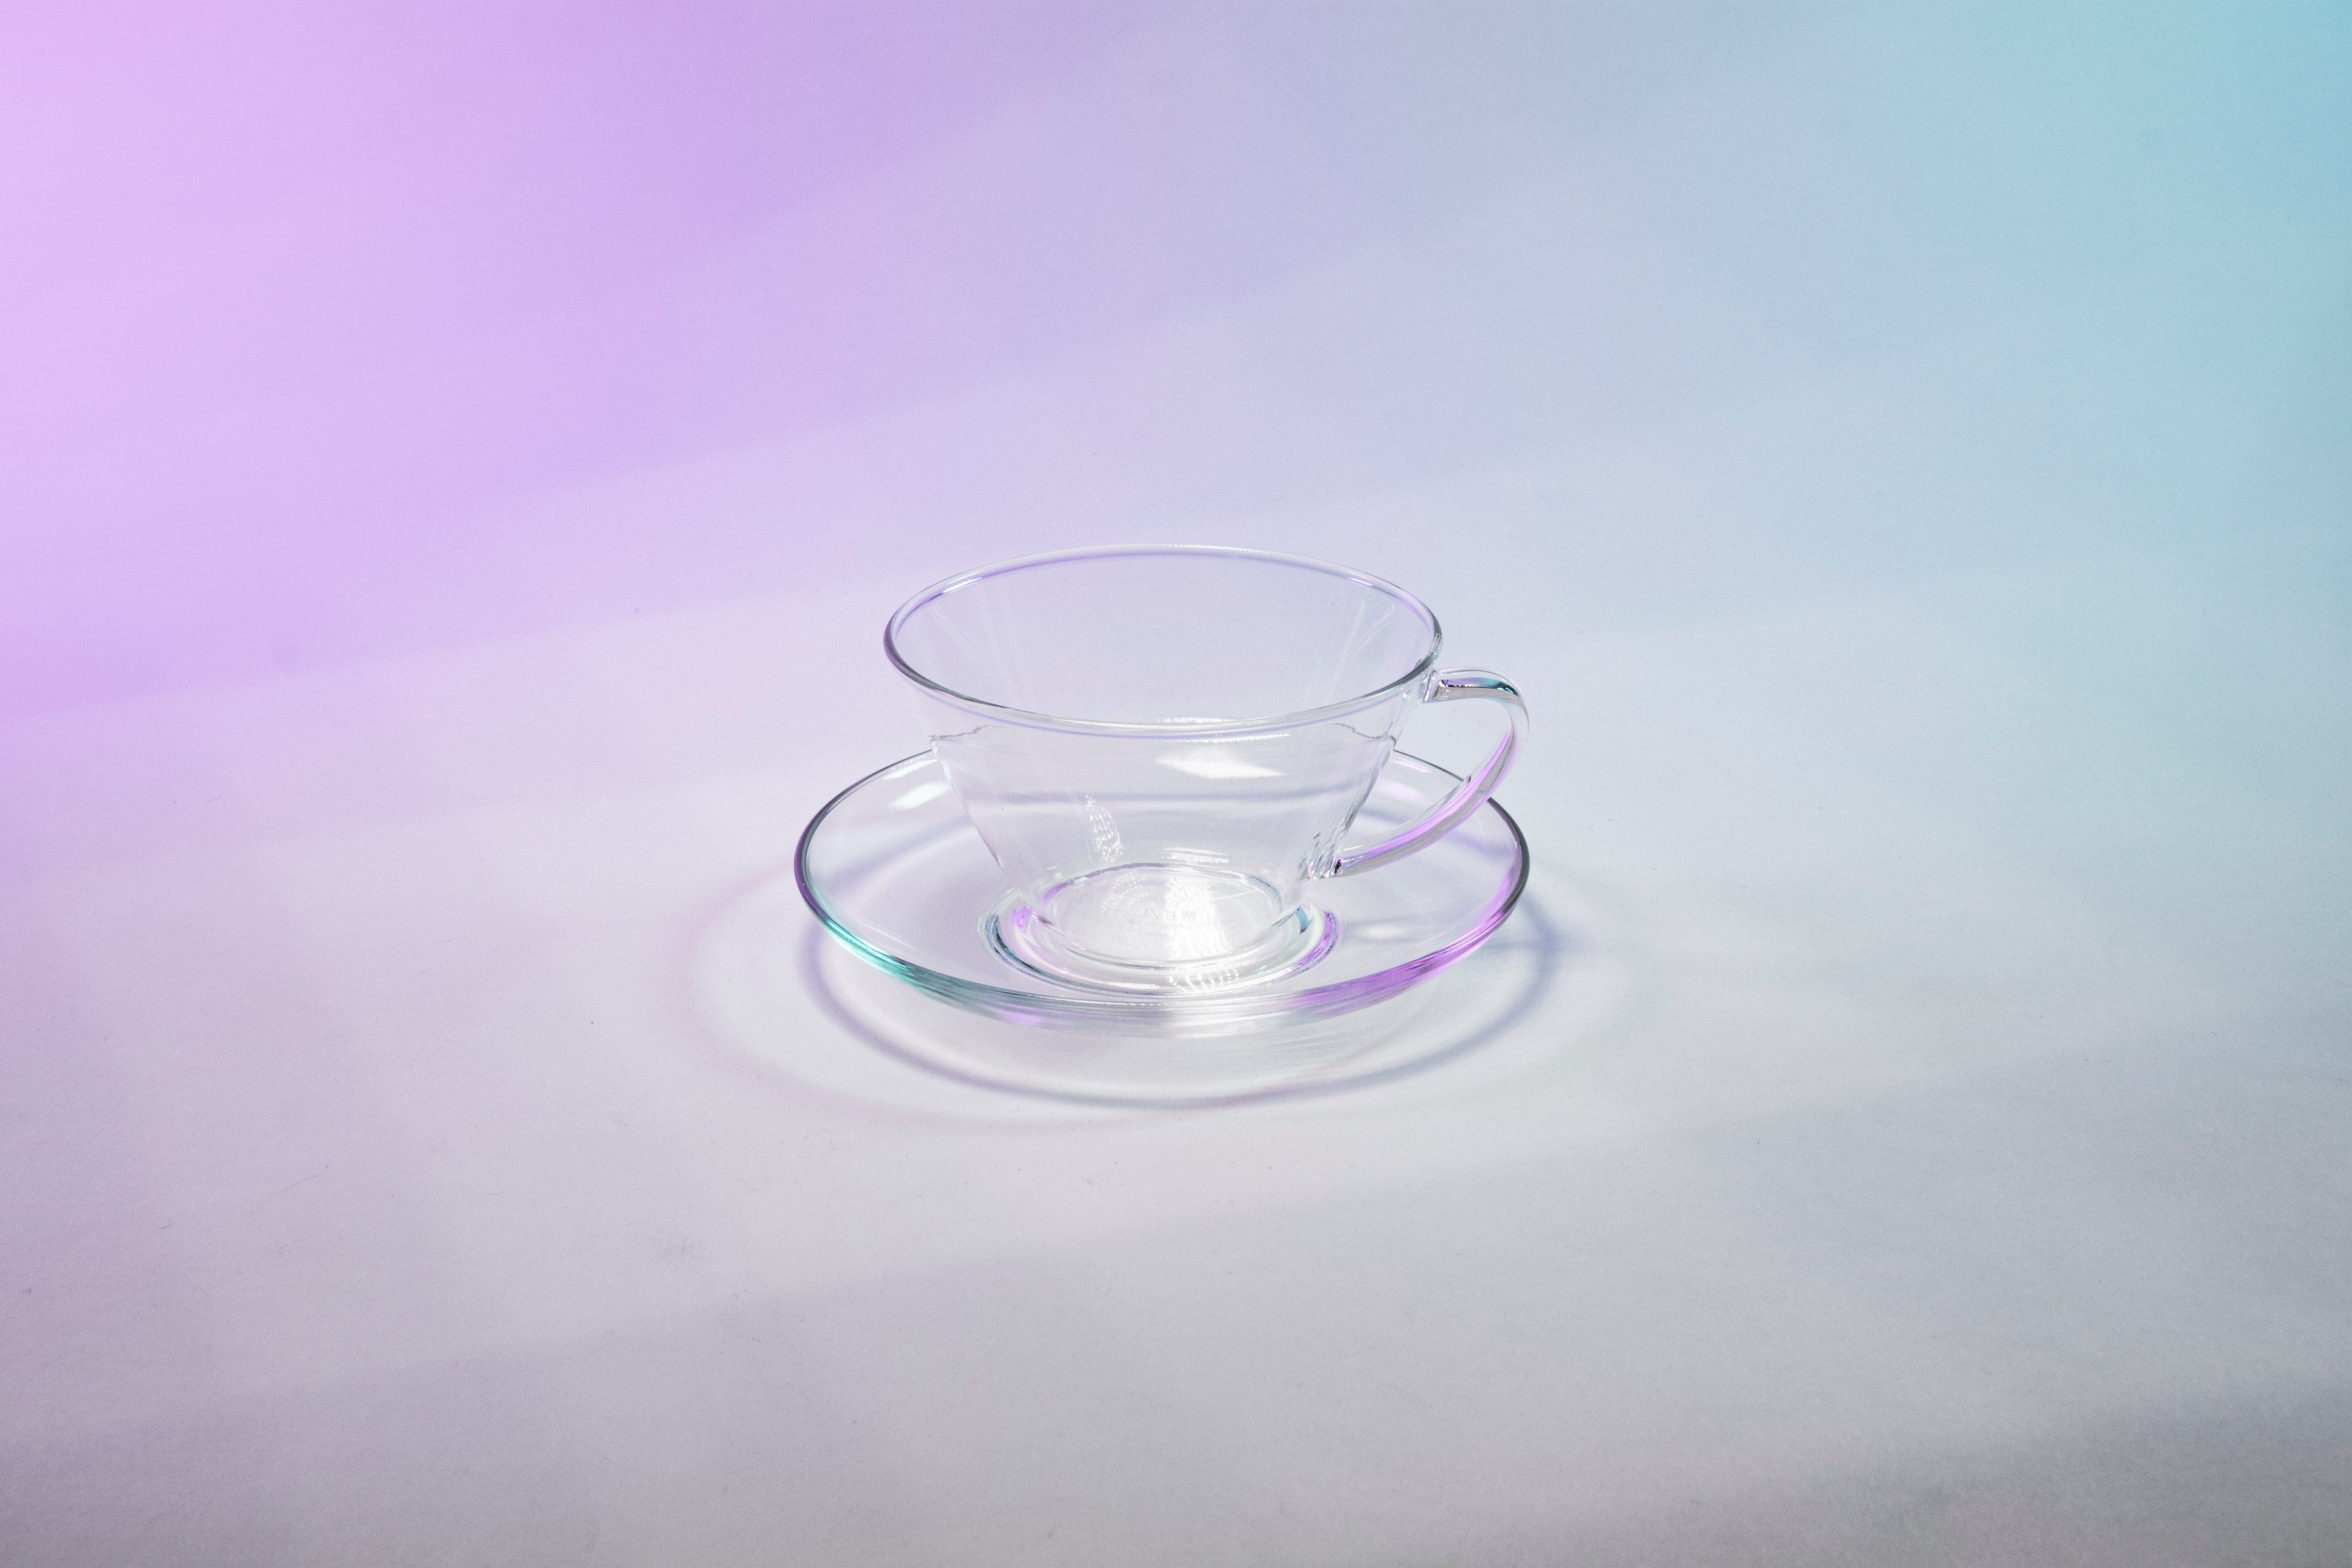 Tapered small glass cup with full glass handle sitting in a matching glass saucer.